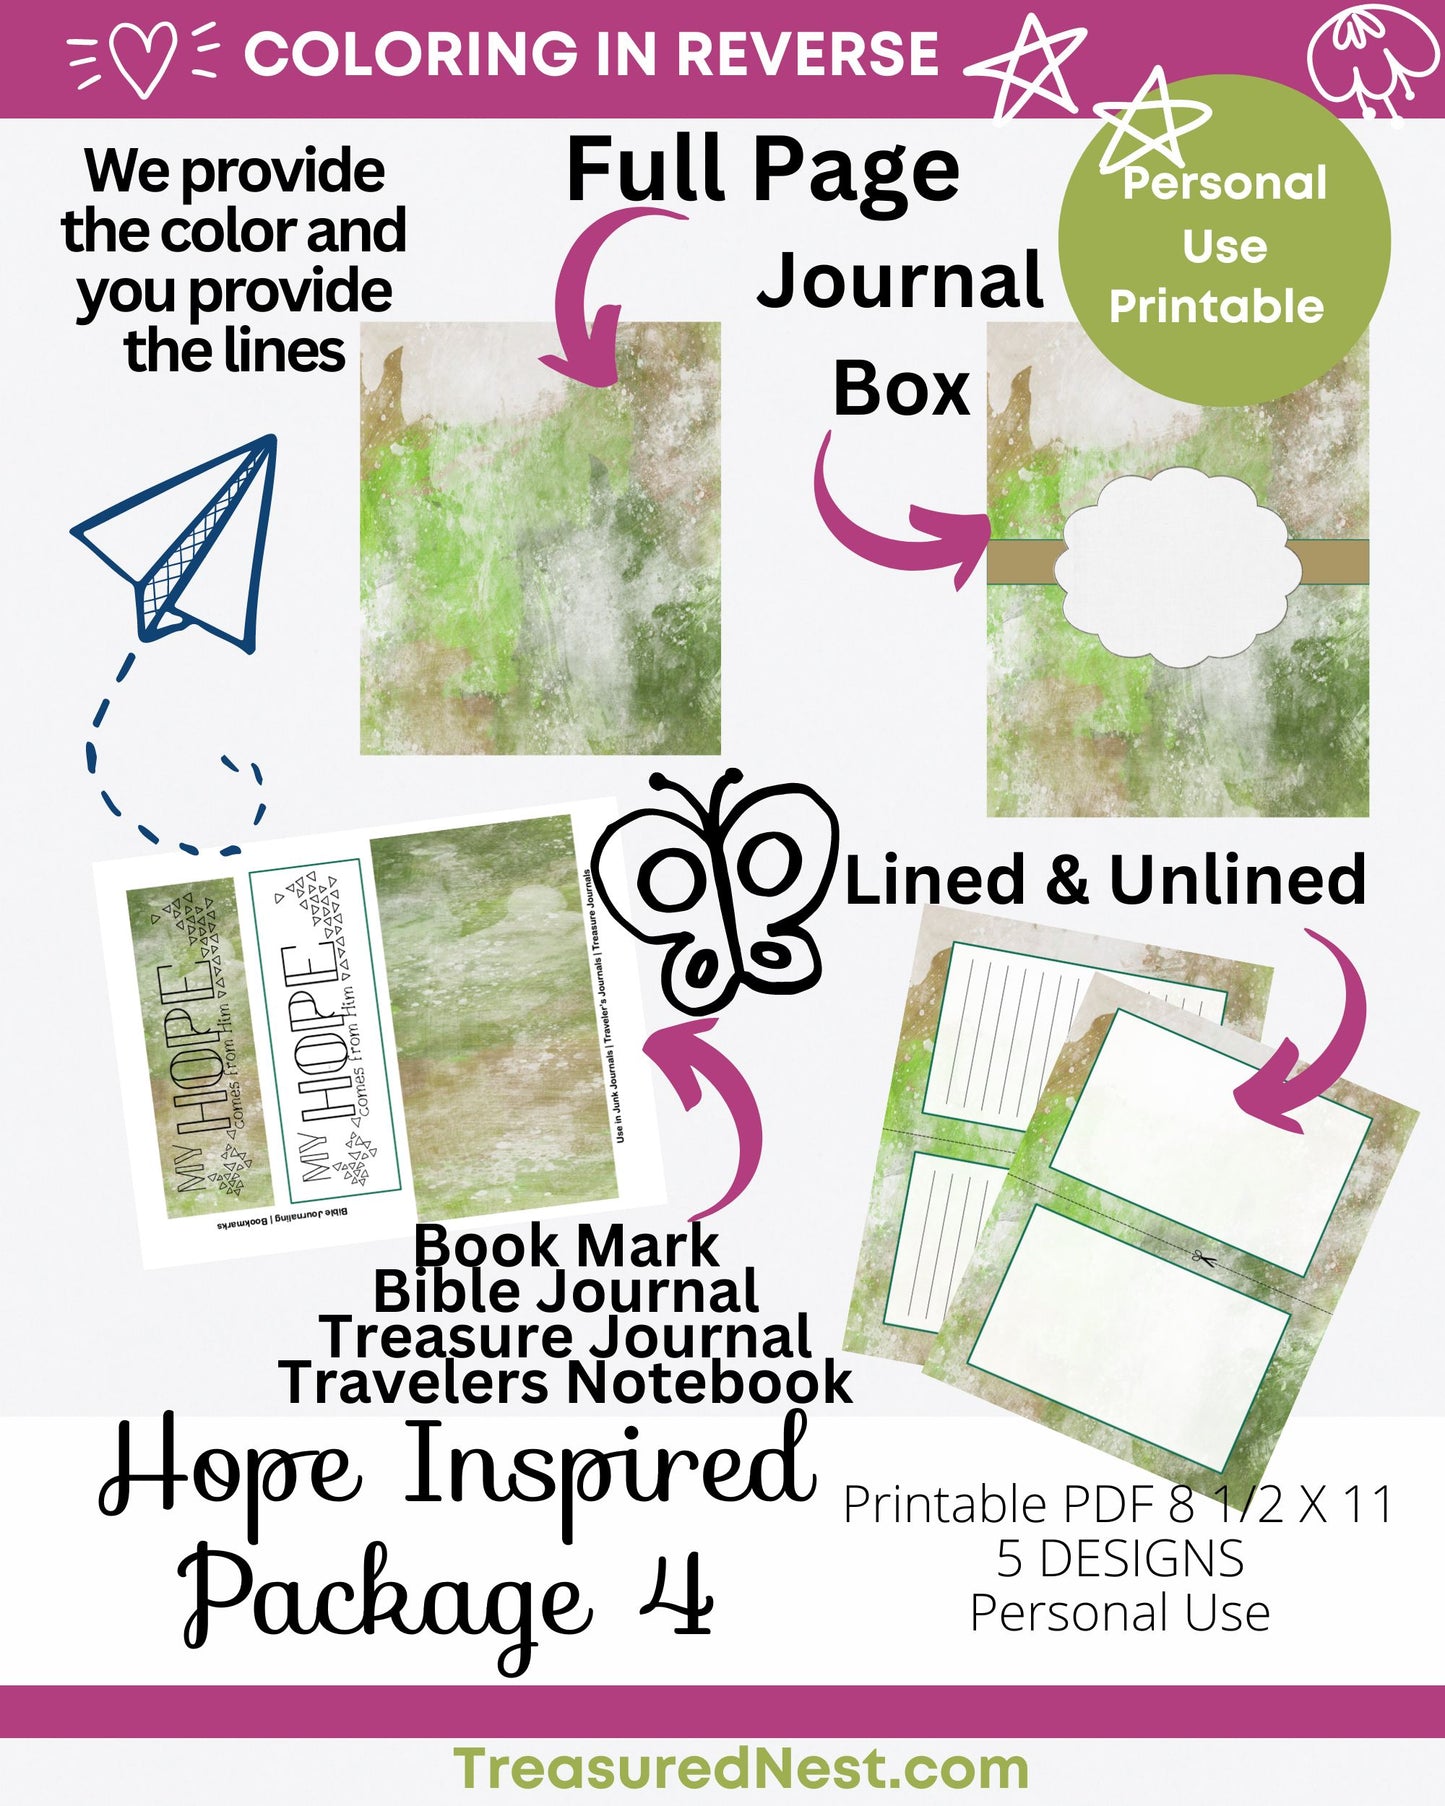 COLOR IN REVERSE - HOPE INSPIRED Package #4